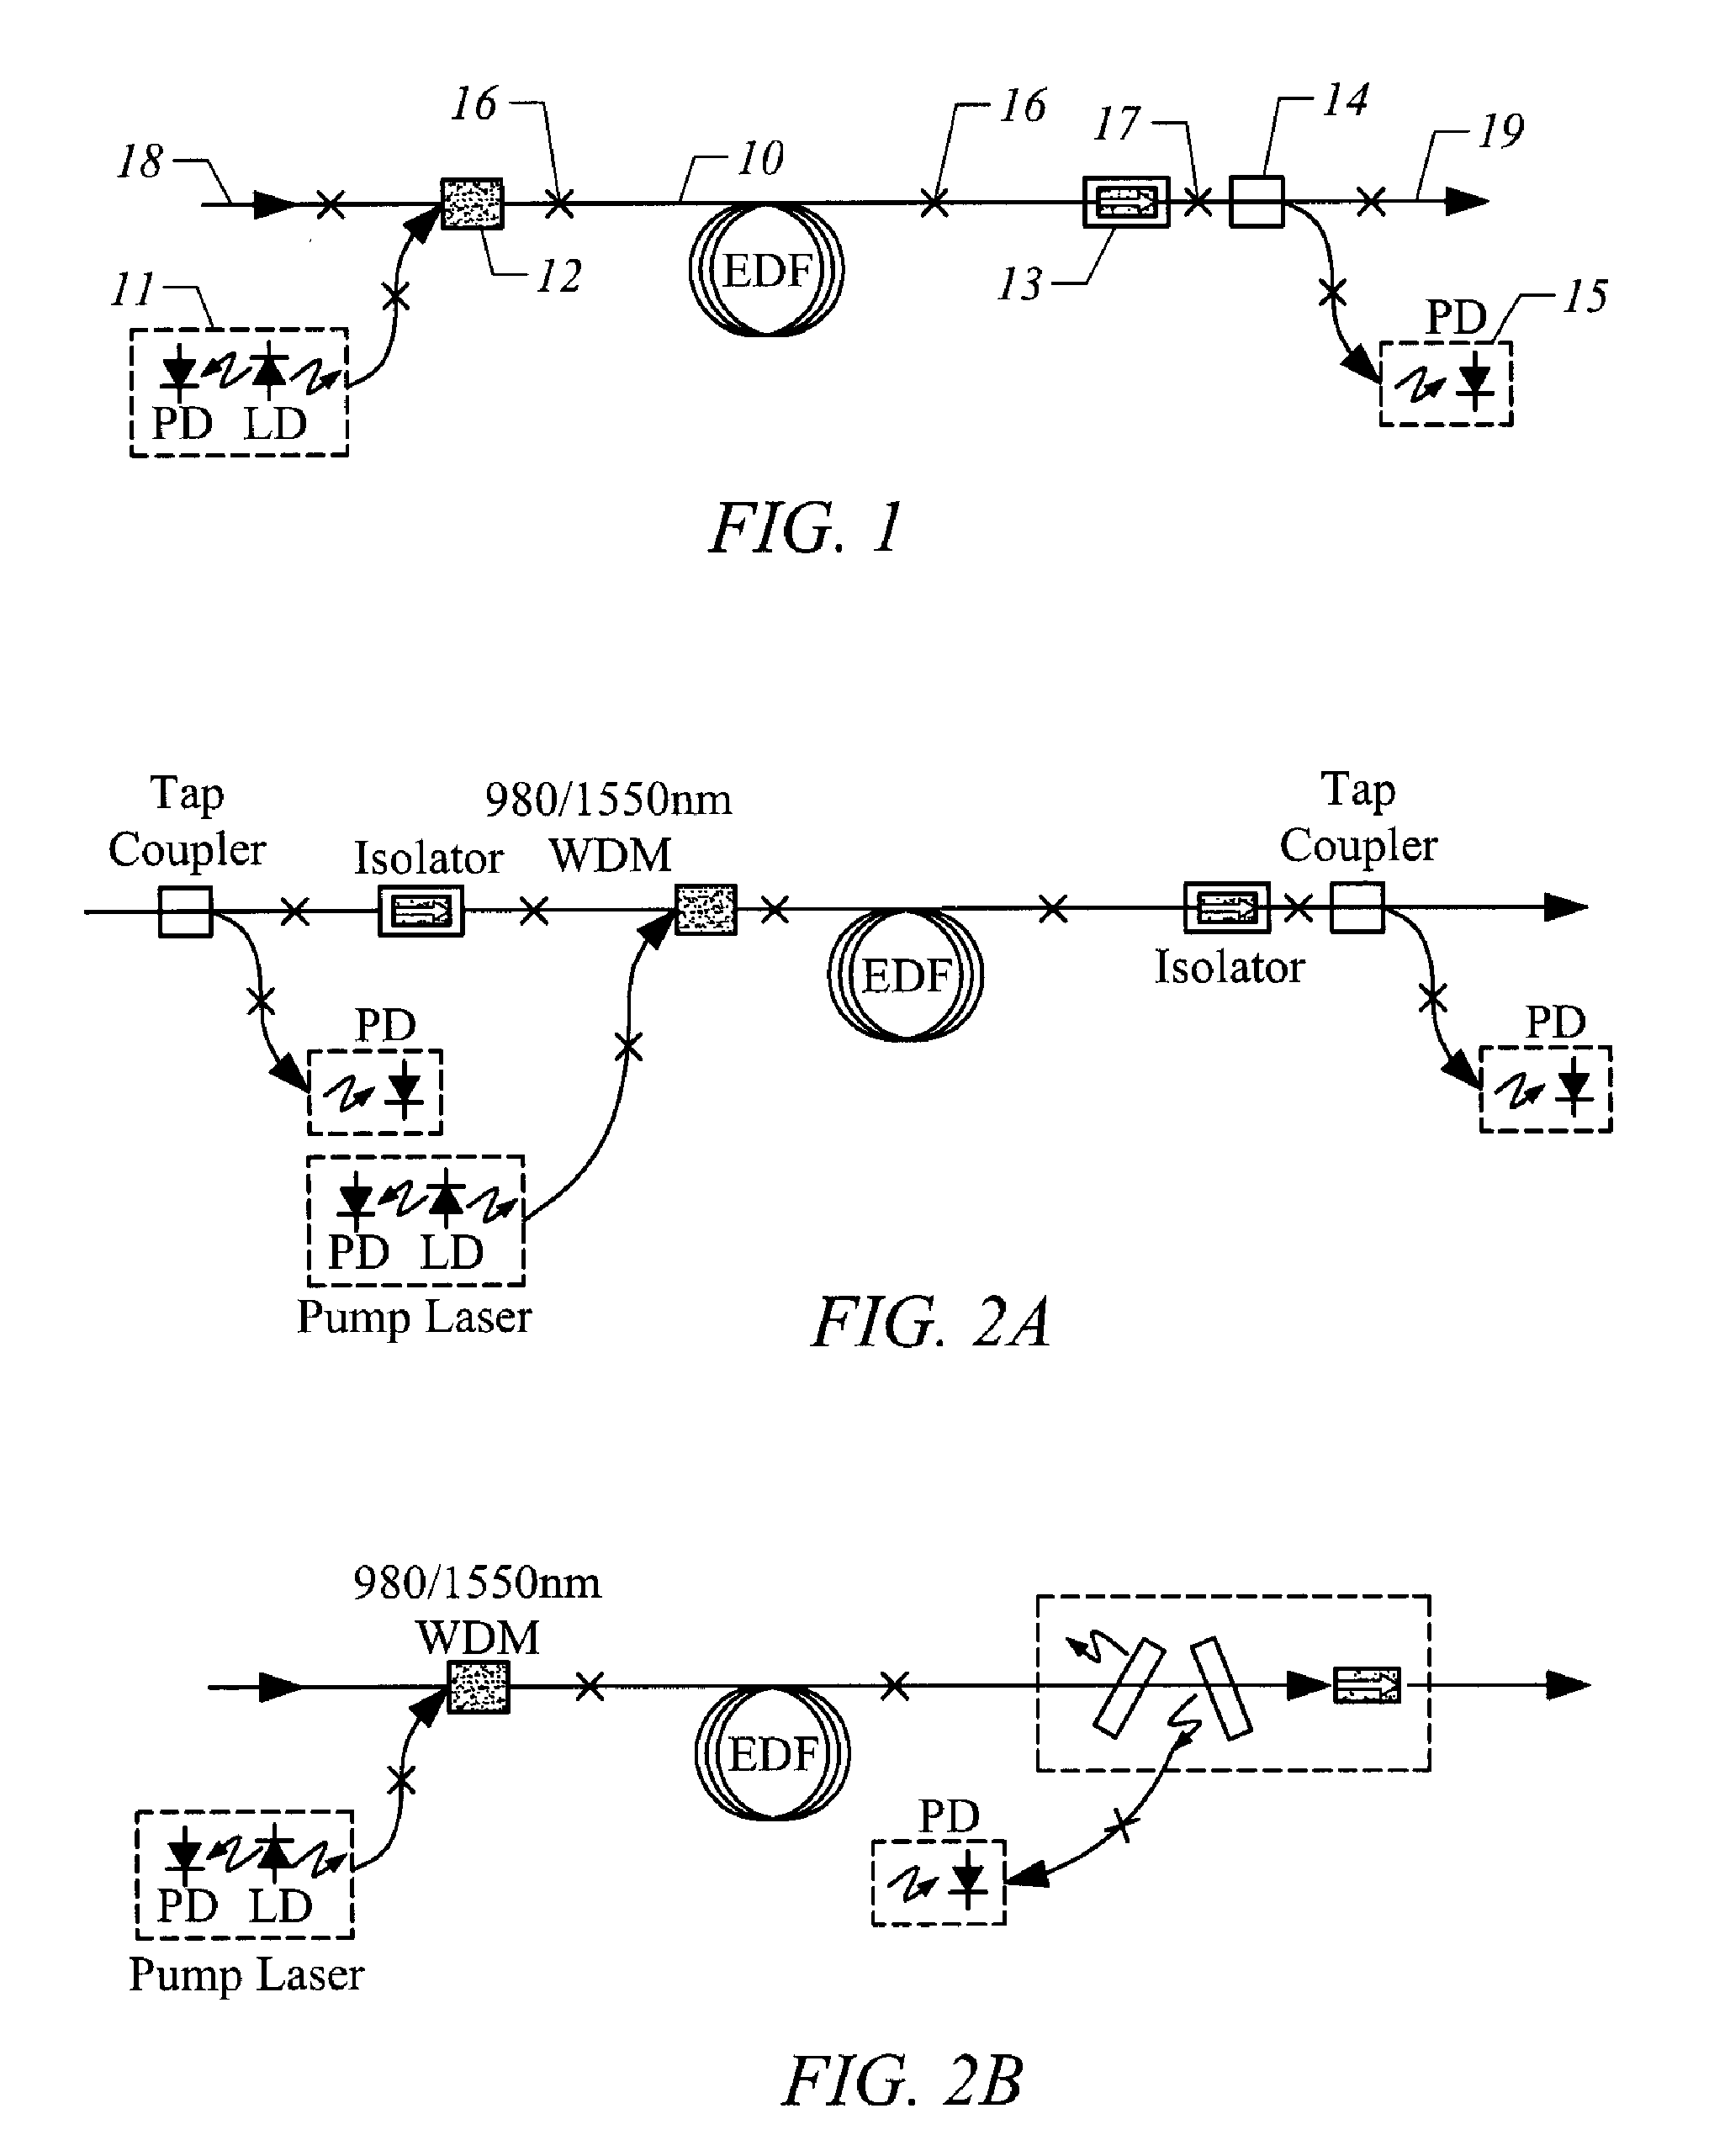 Erbium-doped fiber amplifier and integrated circuit module components